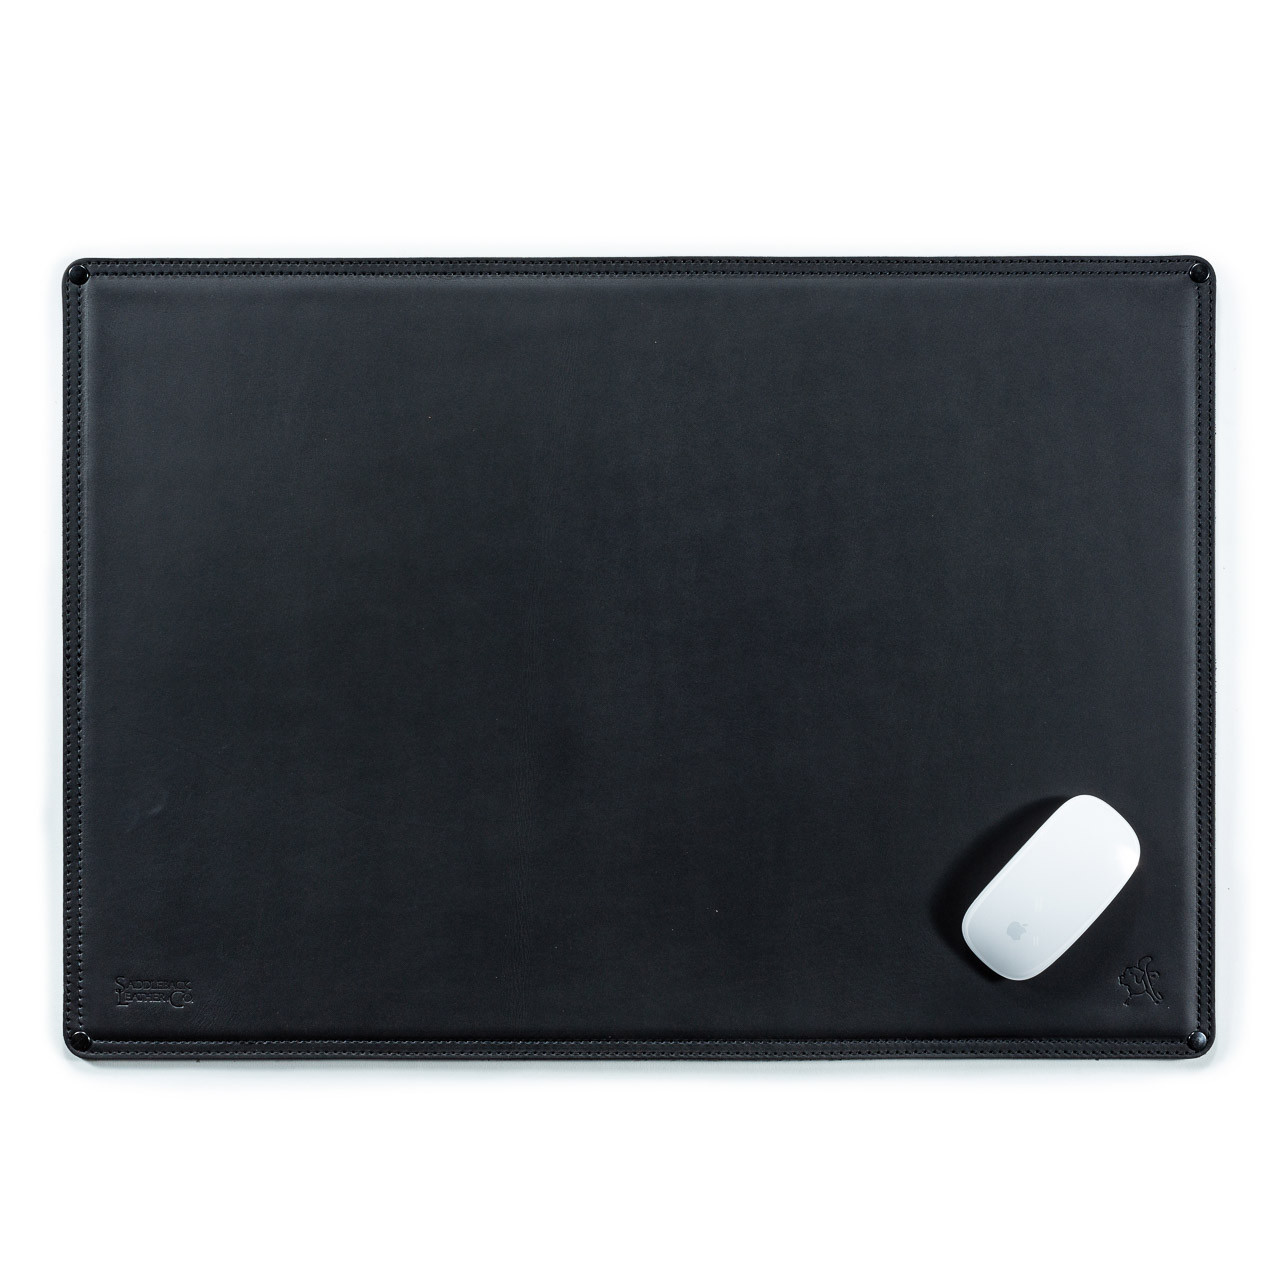 Personalized Full Grain Leather Desk Pad Blotter , Black Leather Table Mat,  Large Leather Office Desk Writing Pad LMXXS 